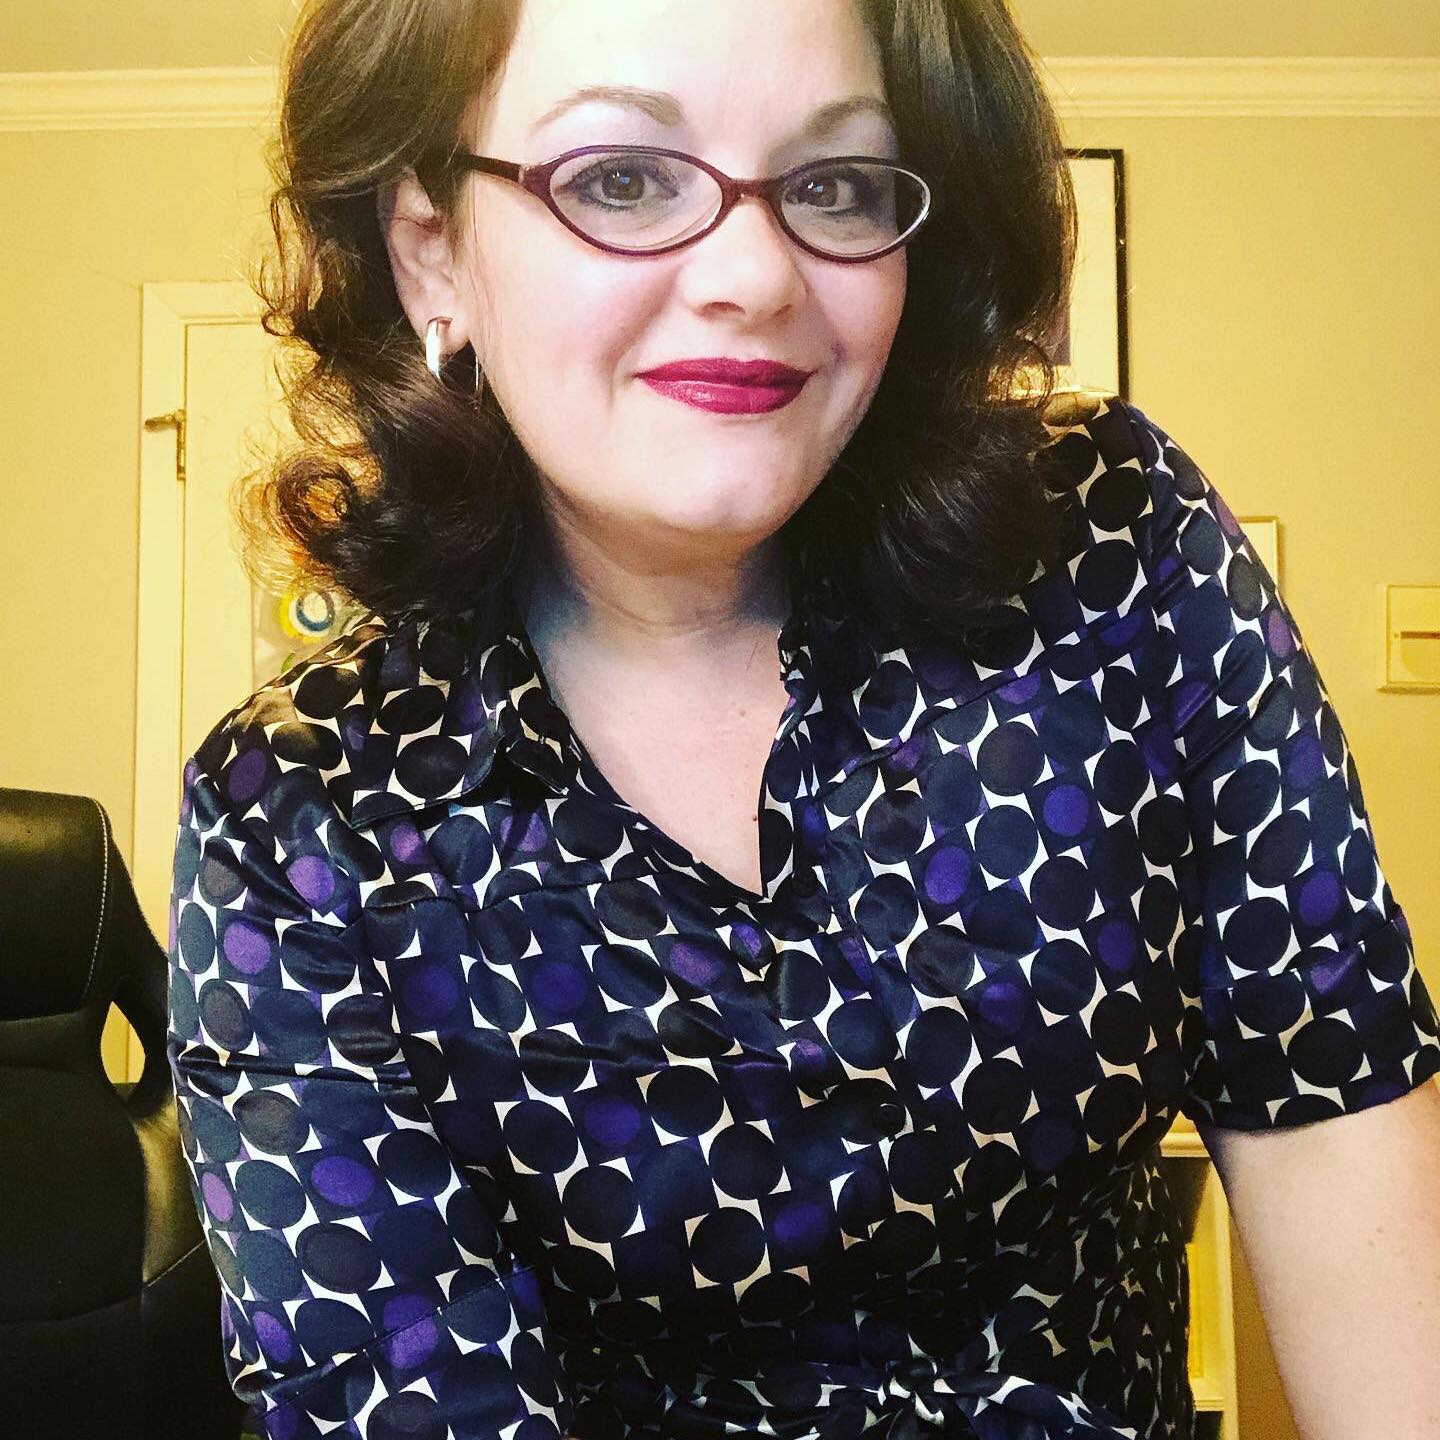 White woman woman spectacles, red lipstick, and blue and purple blouse